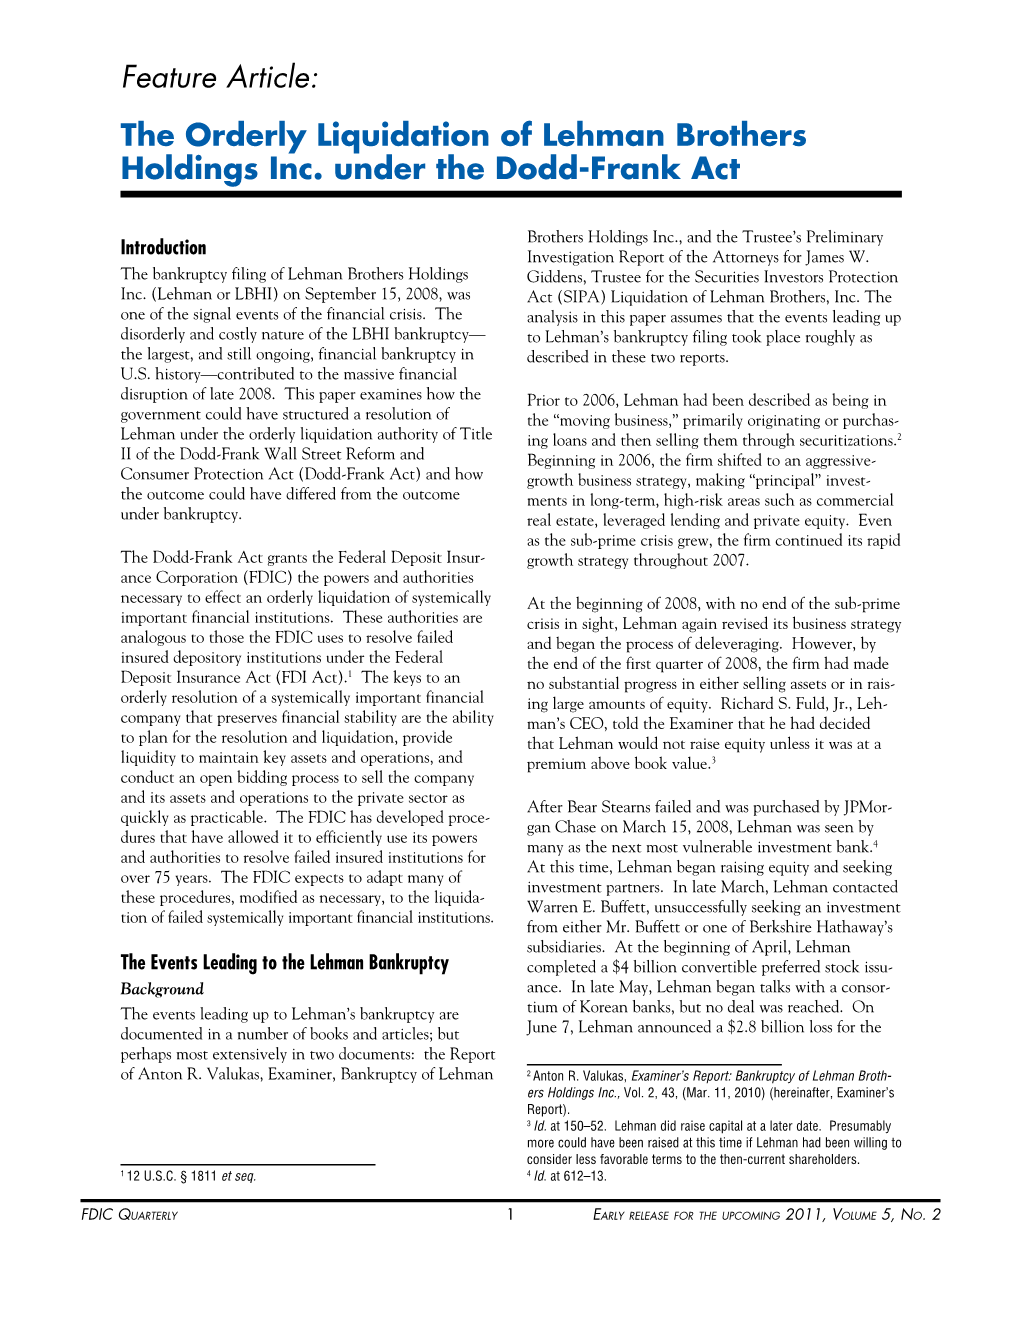 The Orderly Liquidation of Lehman Brothers Holdings Inc. Under the Dodd-Frank Act